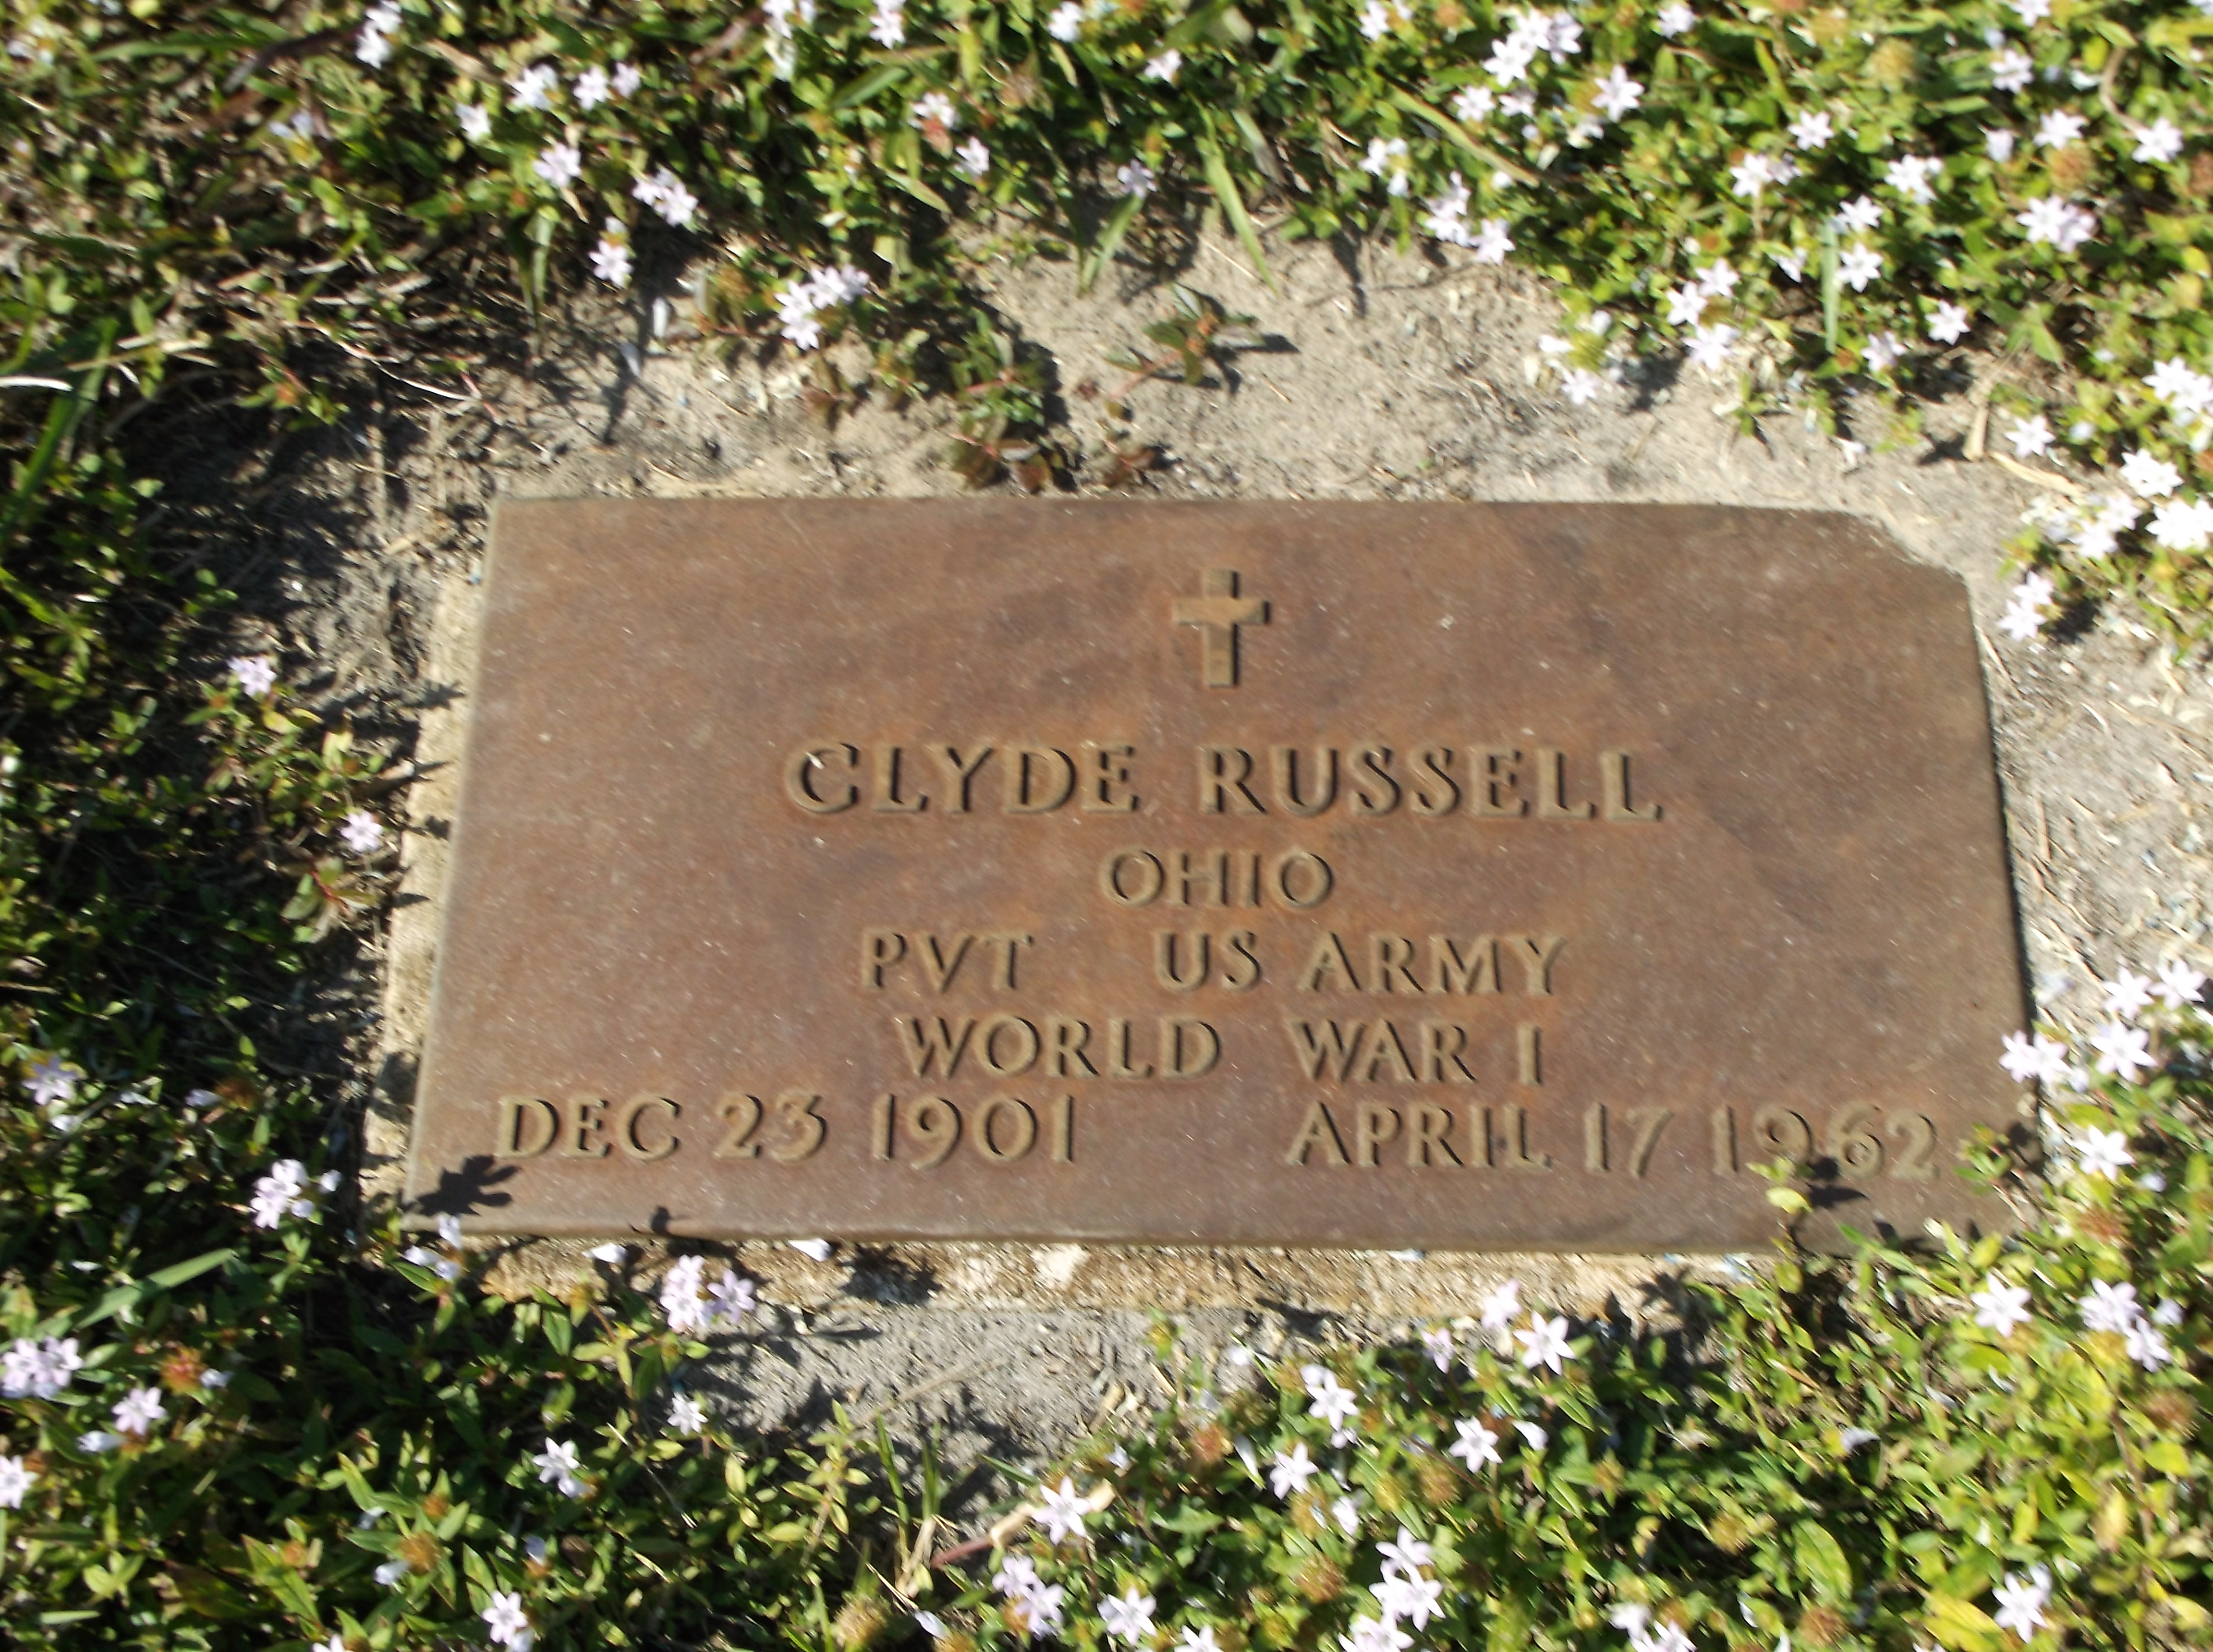 Clyde Russell